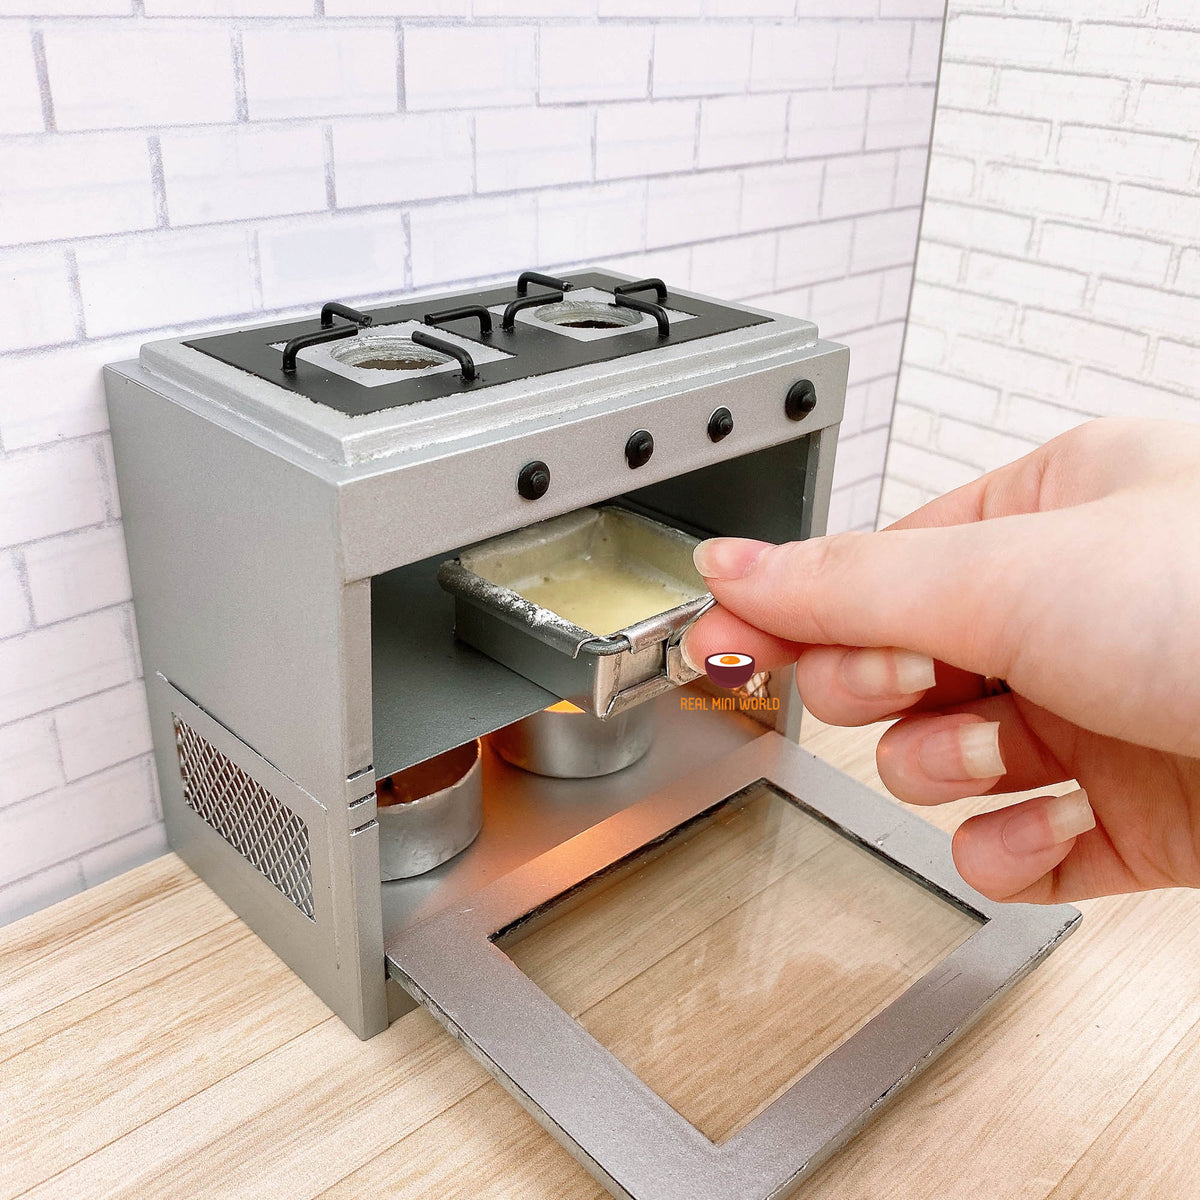 Tiny Baking Set  Miniature REAL Cooking & Baking 2in1 Oven Stove